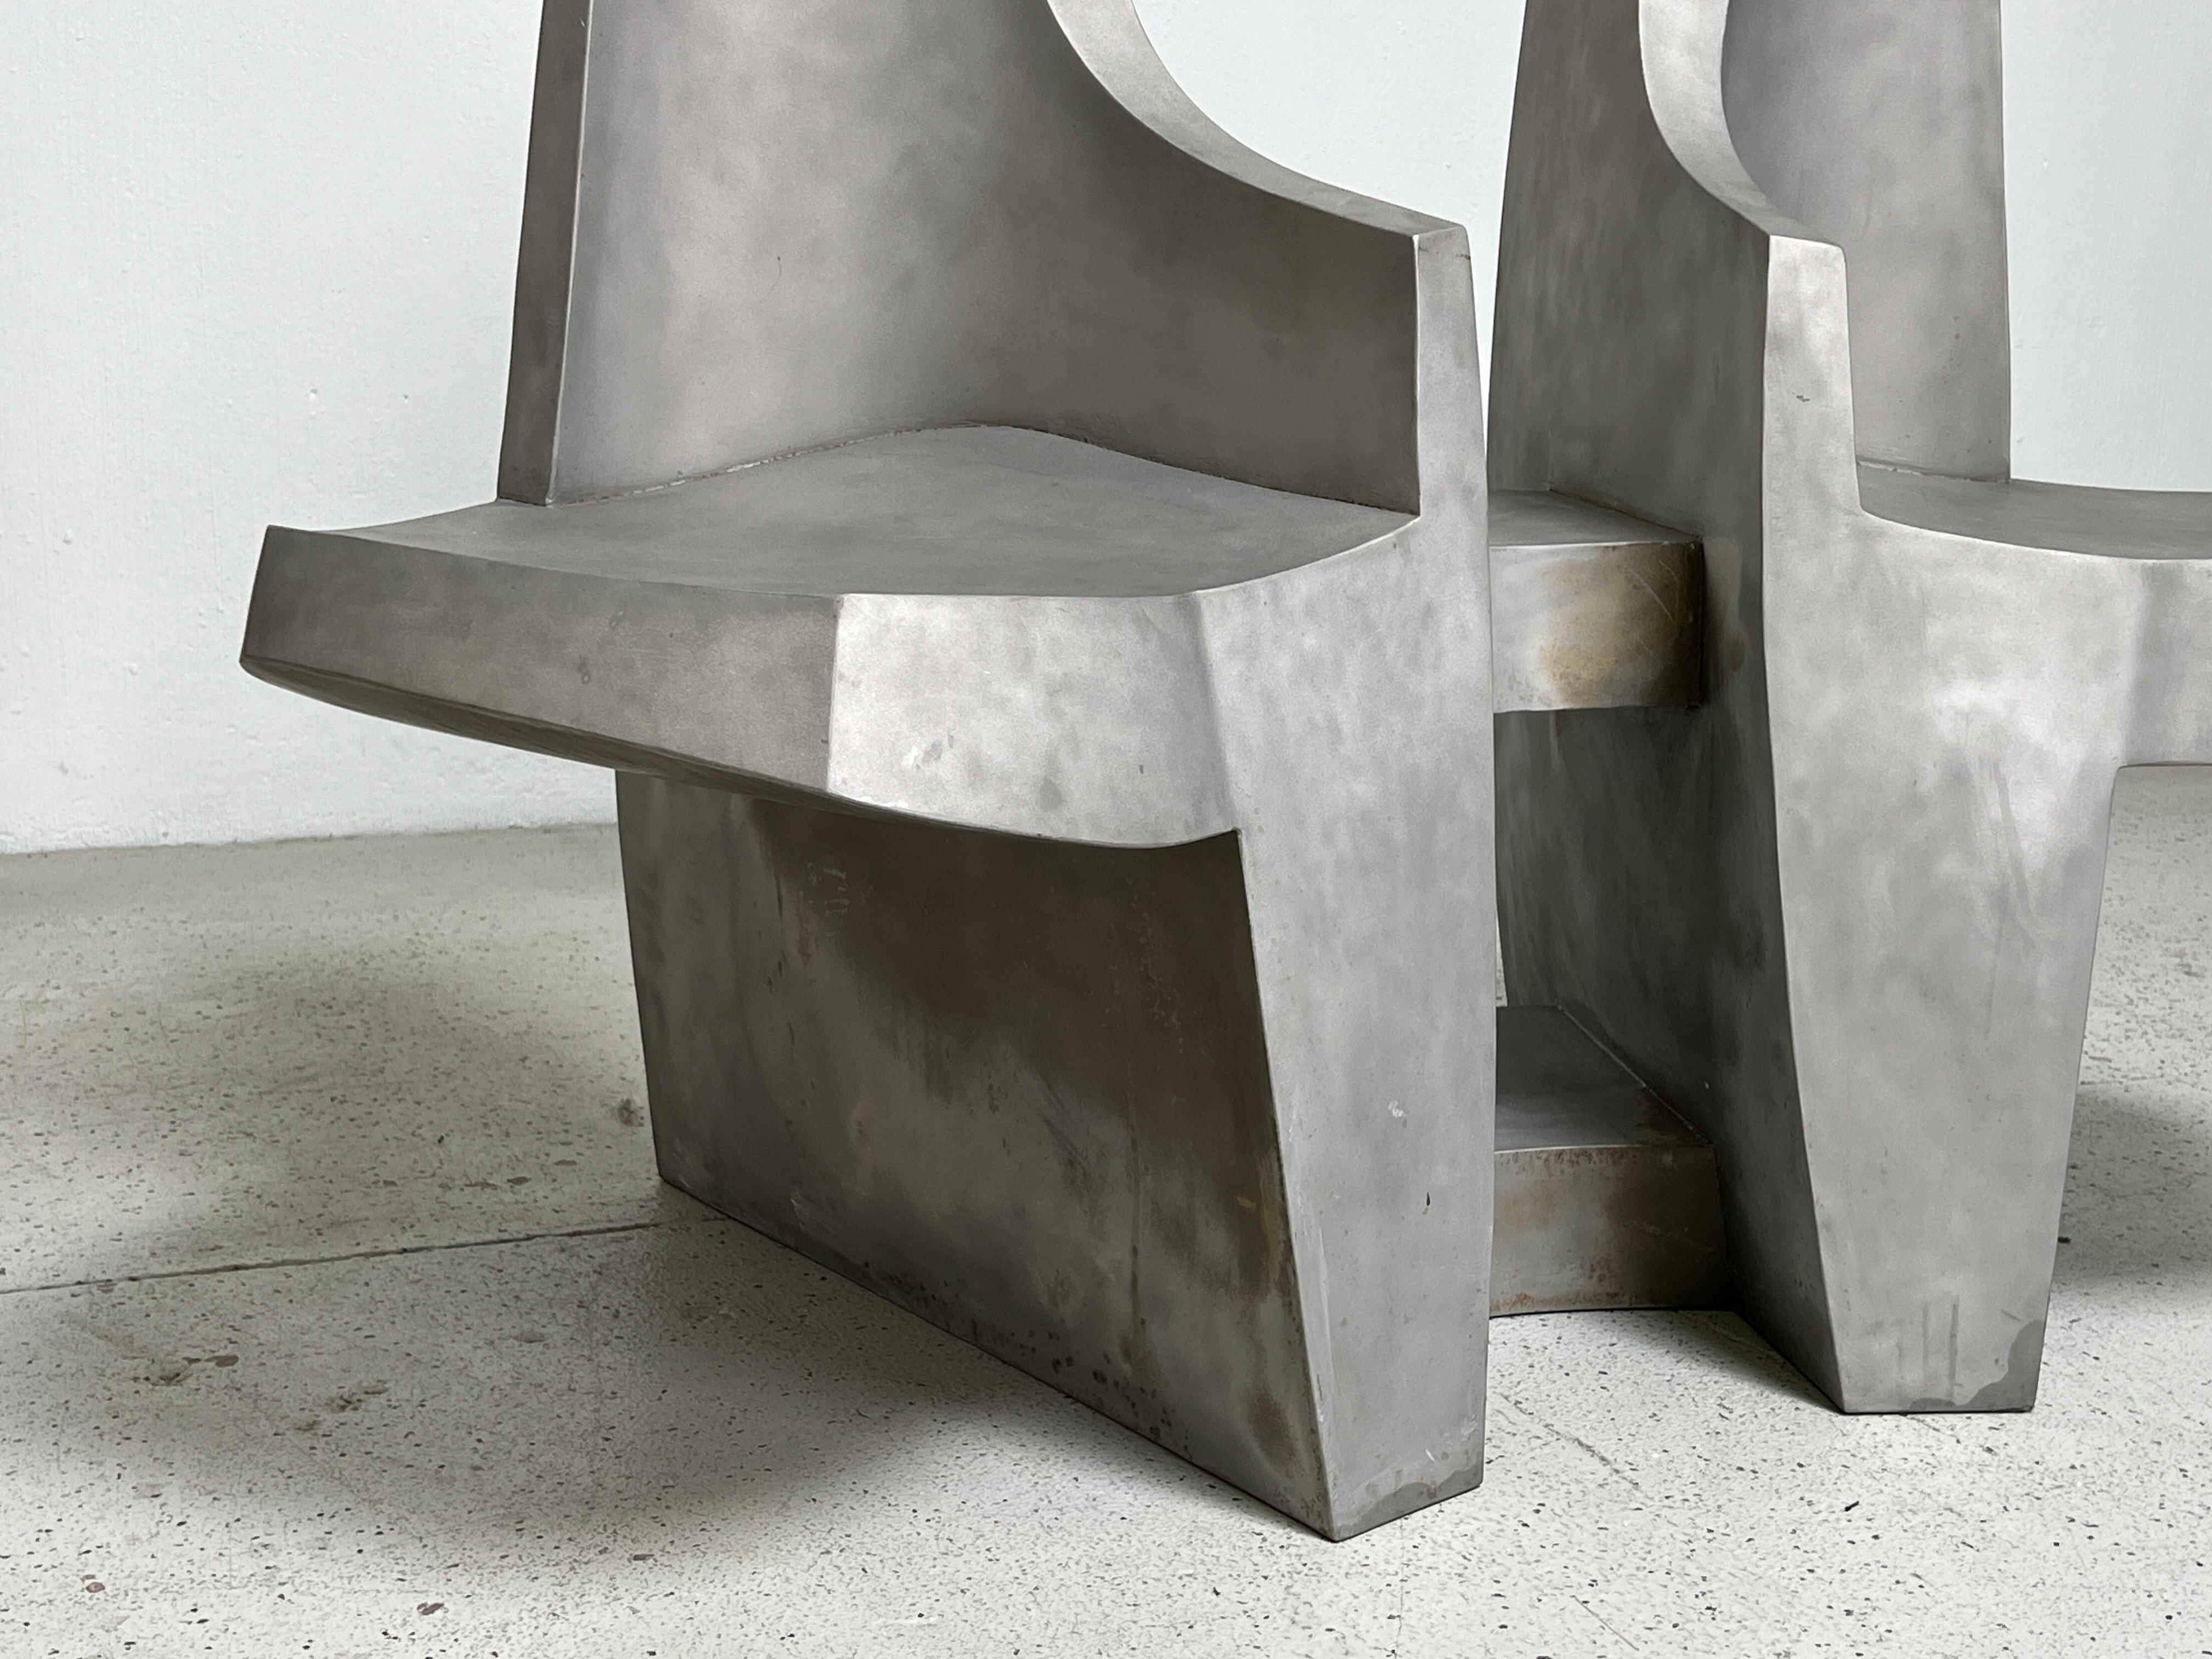 Aluminum Settee / Bench by Jim Cole  2